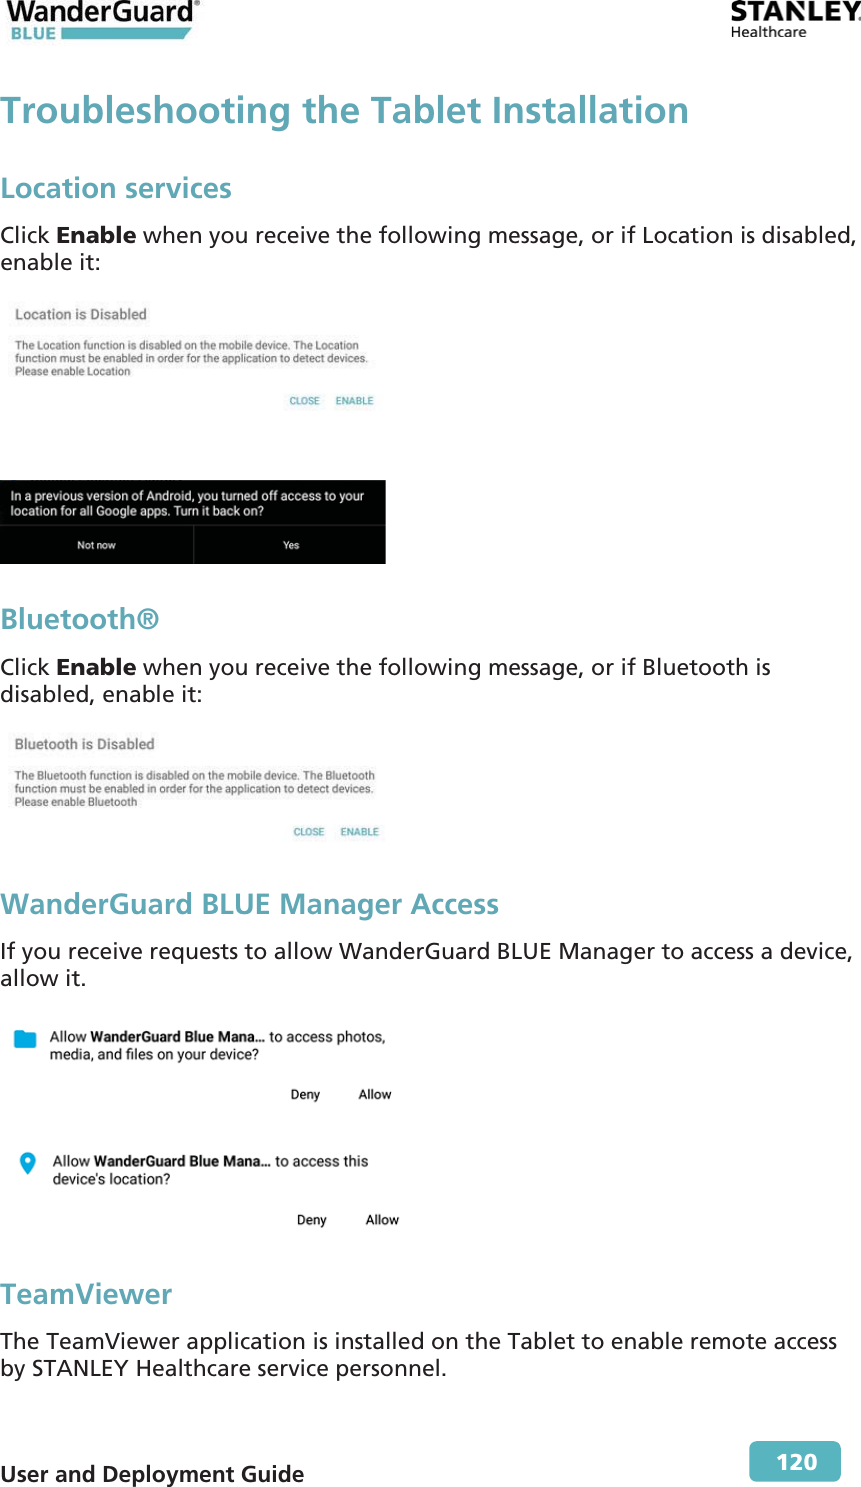  User and Deployment Guide        120 Troubleshooting the Tablet InstallationLocation services Click Enable when you receive the following message, or if Location is disabled, enable it:    Bluetooth® Click Enable when you receive the following message, or if Bluetooth is disabled, enable it:  WanderGuard BLUE Manager Access If you receive requests to allow WanderGuard BLUE Manager to access a device, allow it.   TeamViewer The TeamViewer application is installed on the Tablet to enable remote access by STANLEY Healthcare service personnel.  